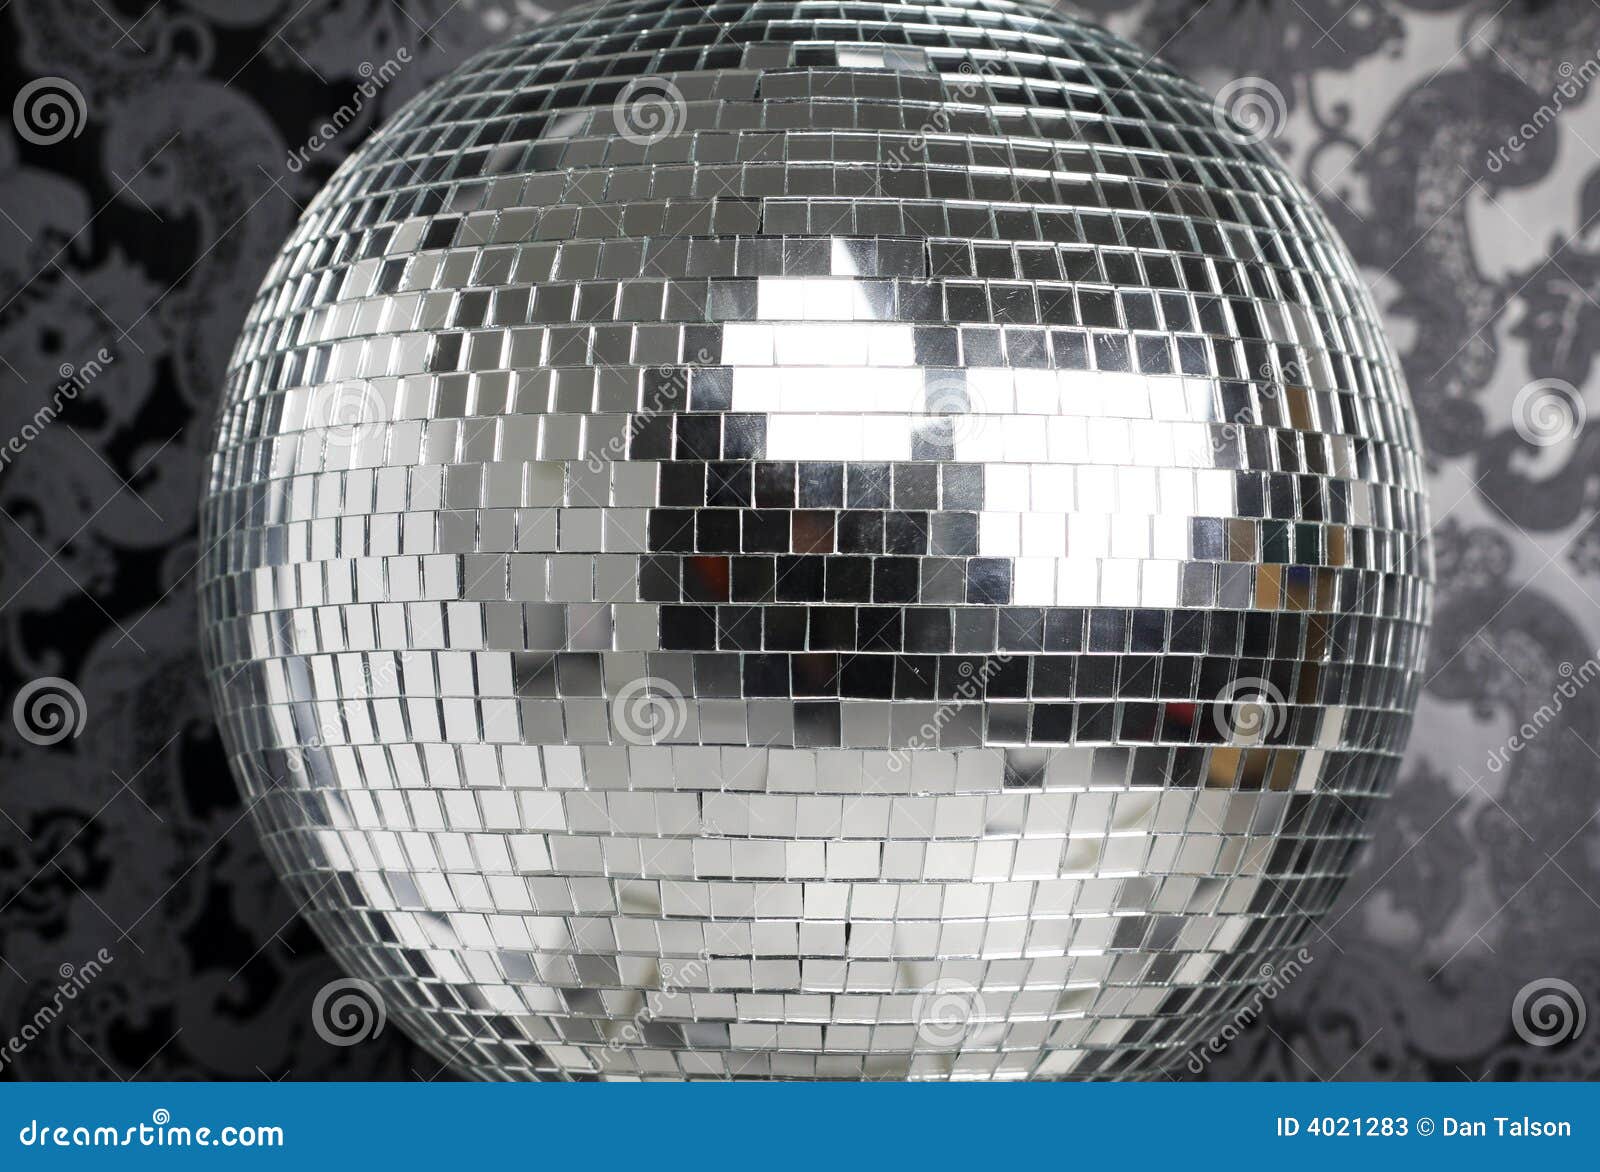 500 Disco Ball Pictures HD  Download Free Images on Unsplash